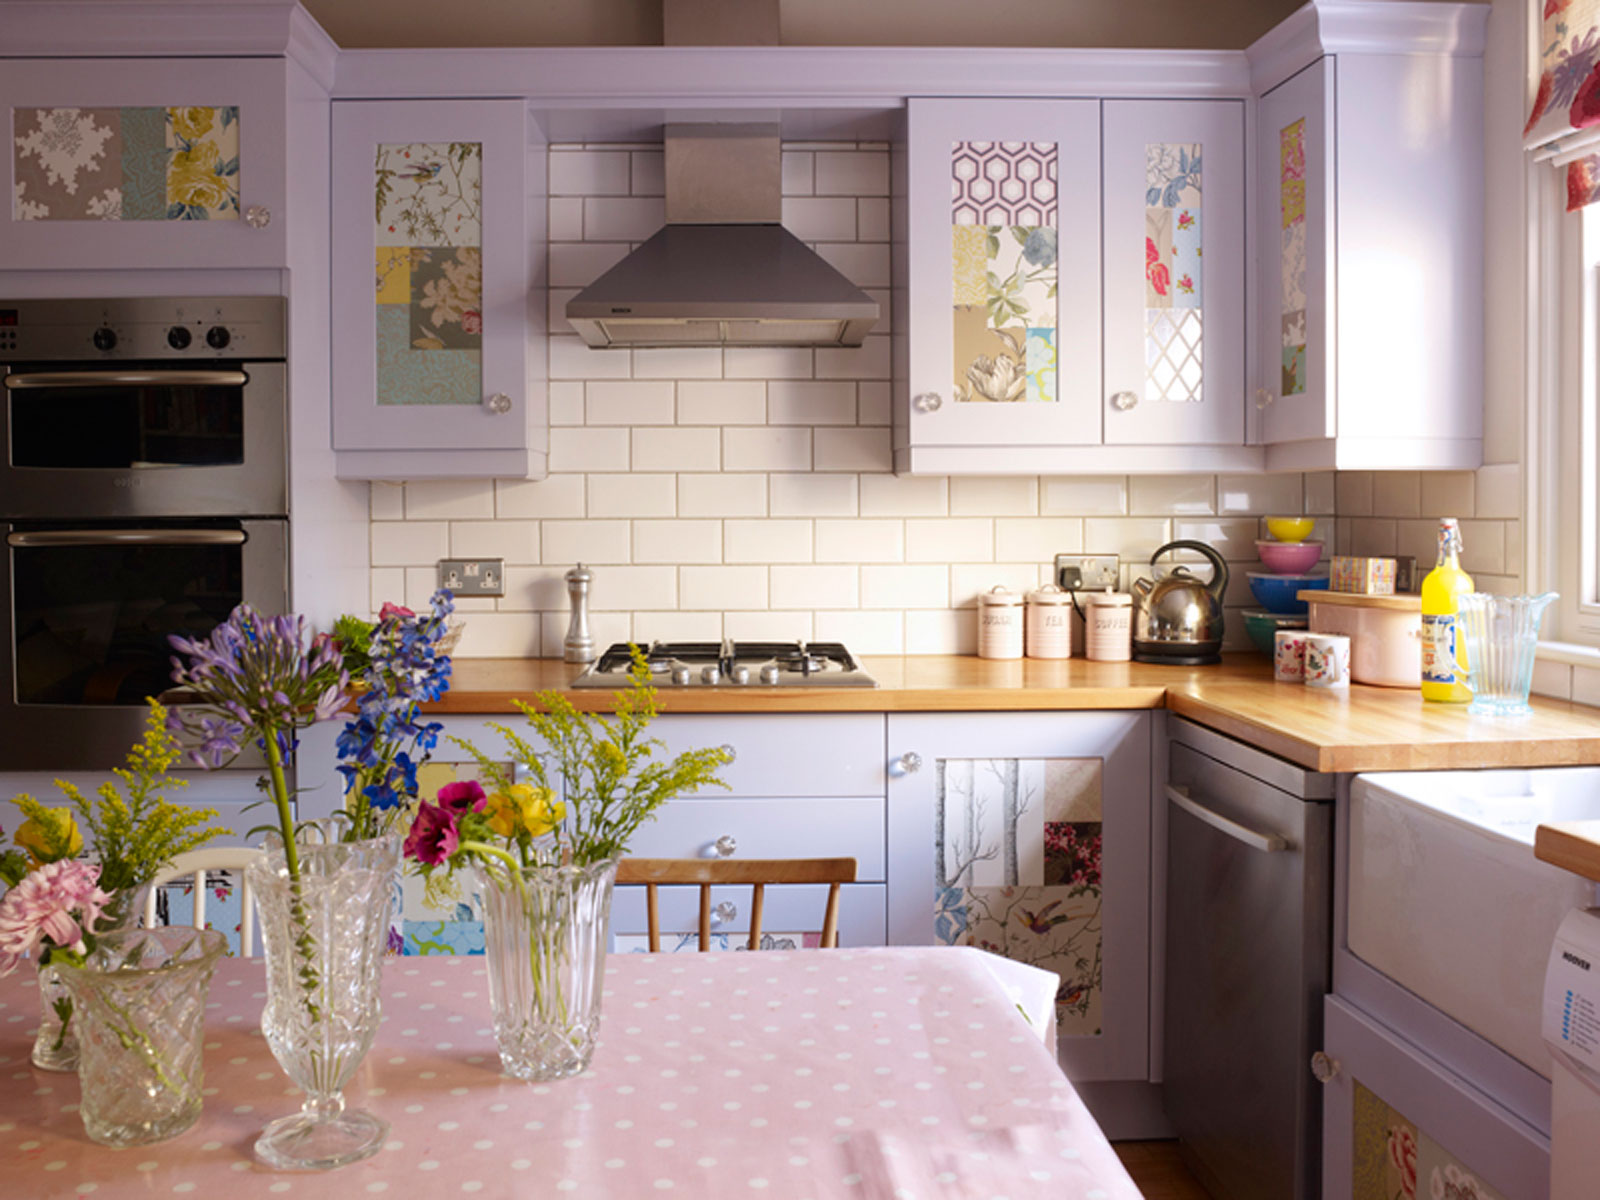 A traditional French country kitchen - featuring lavender